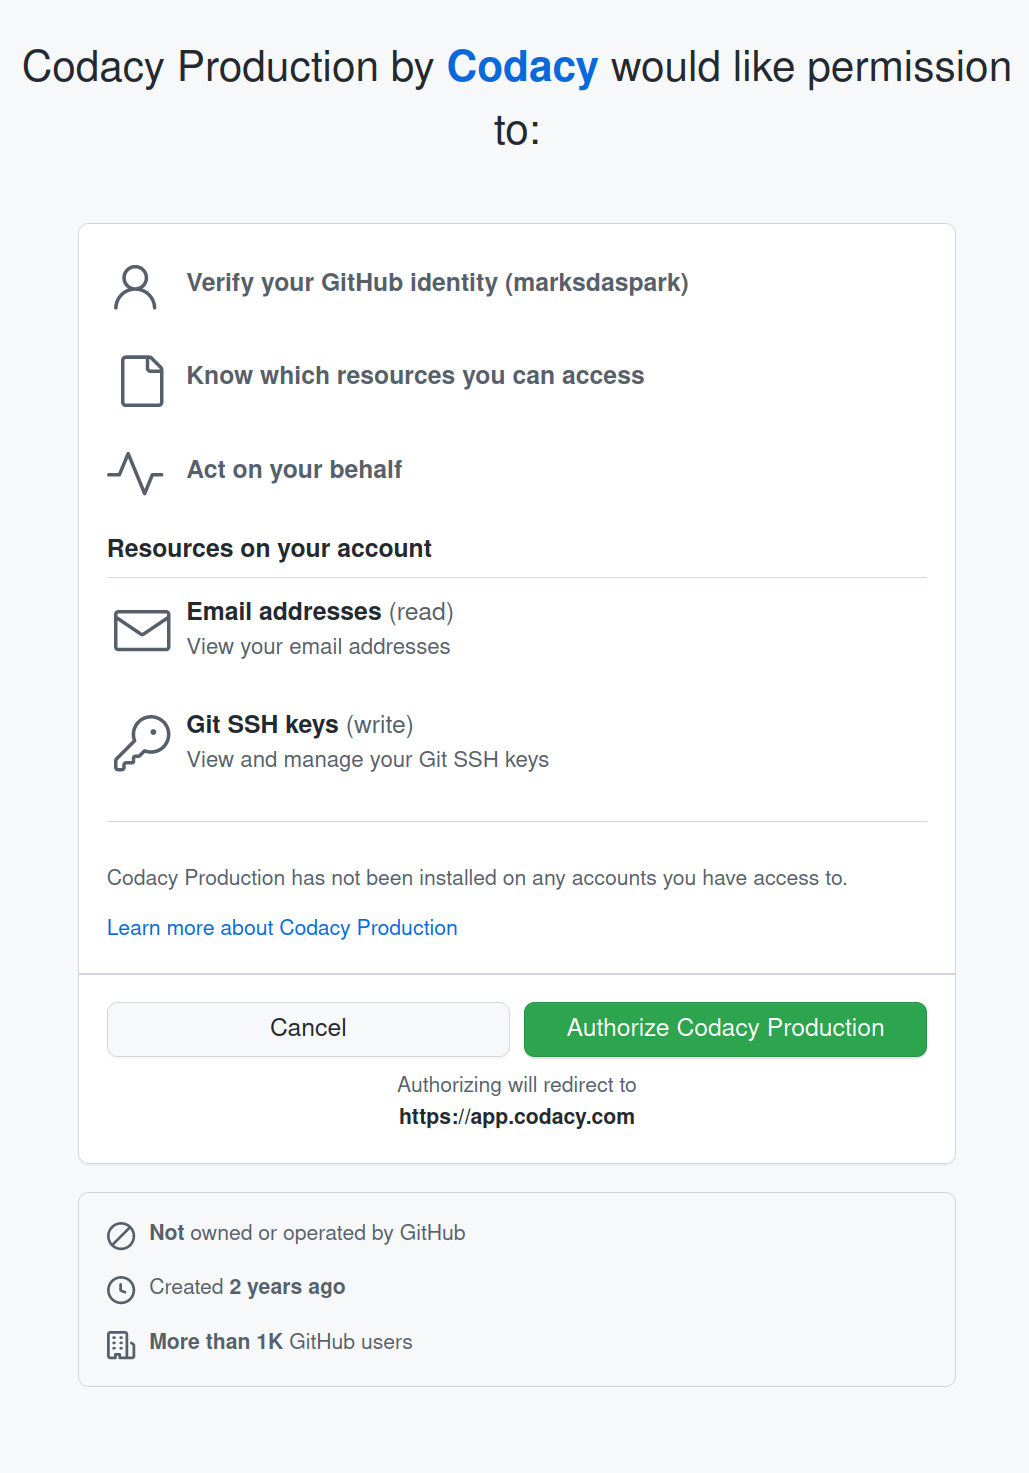 Codacy Production Auth page